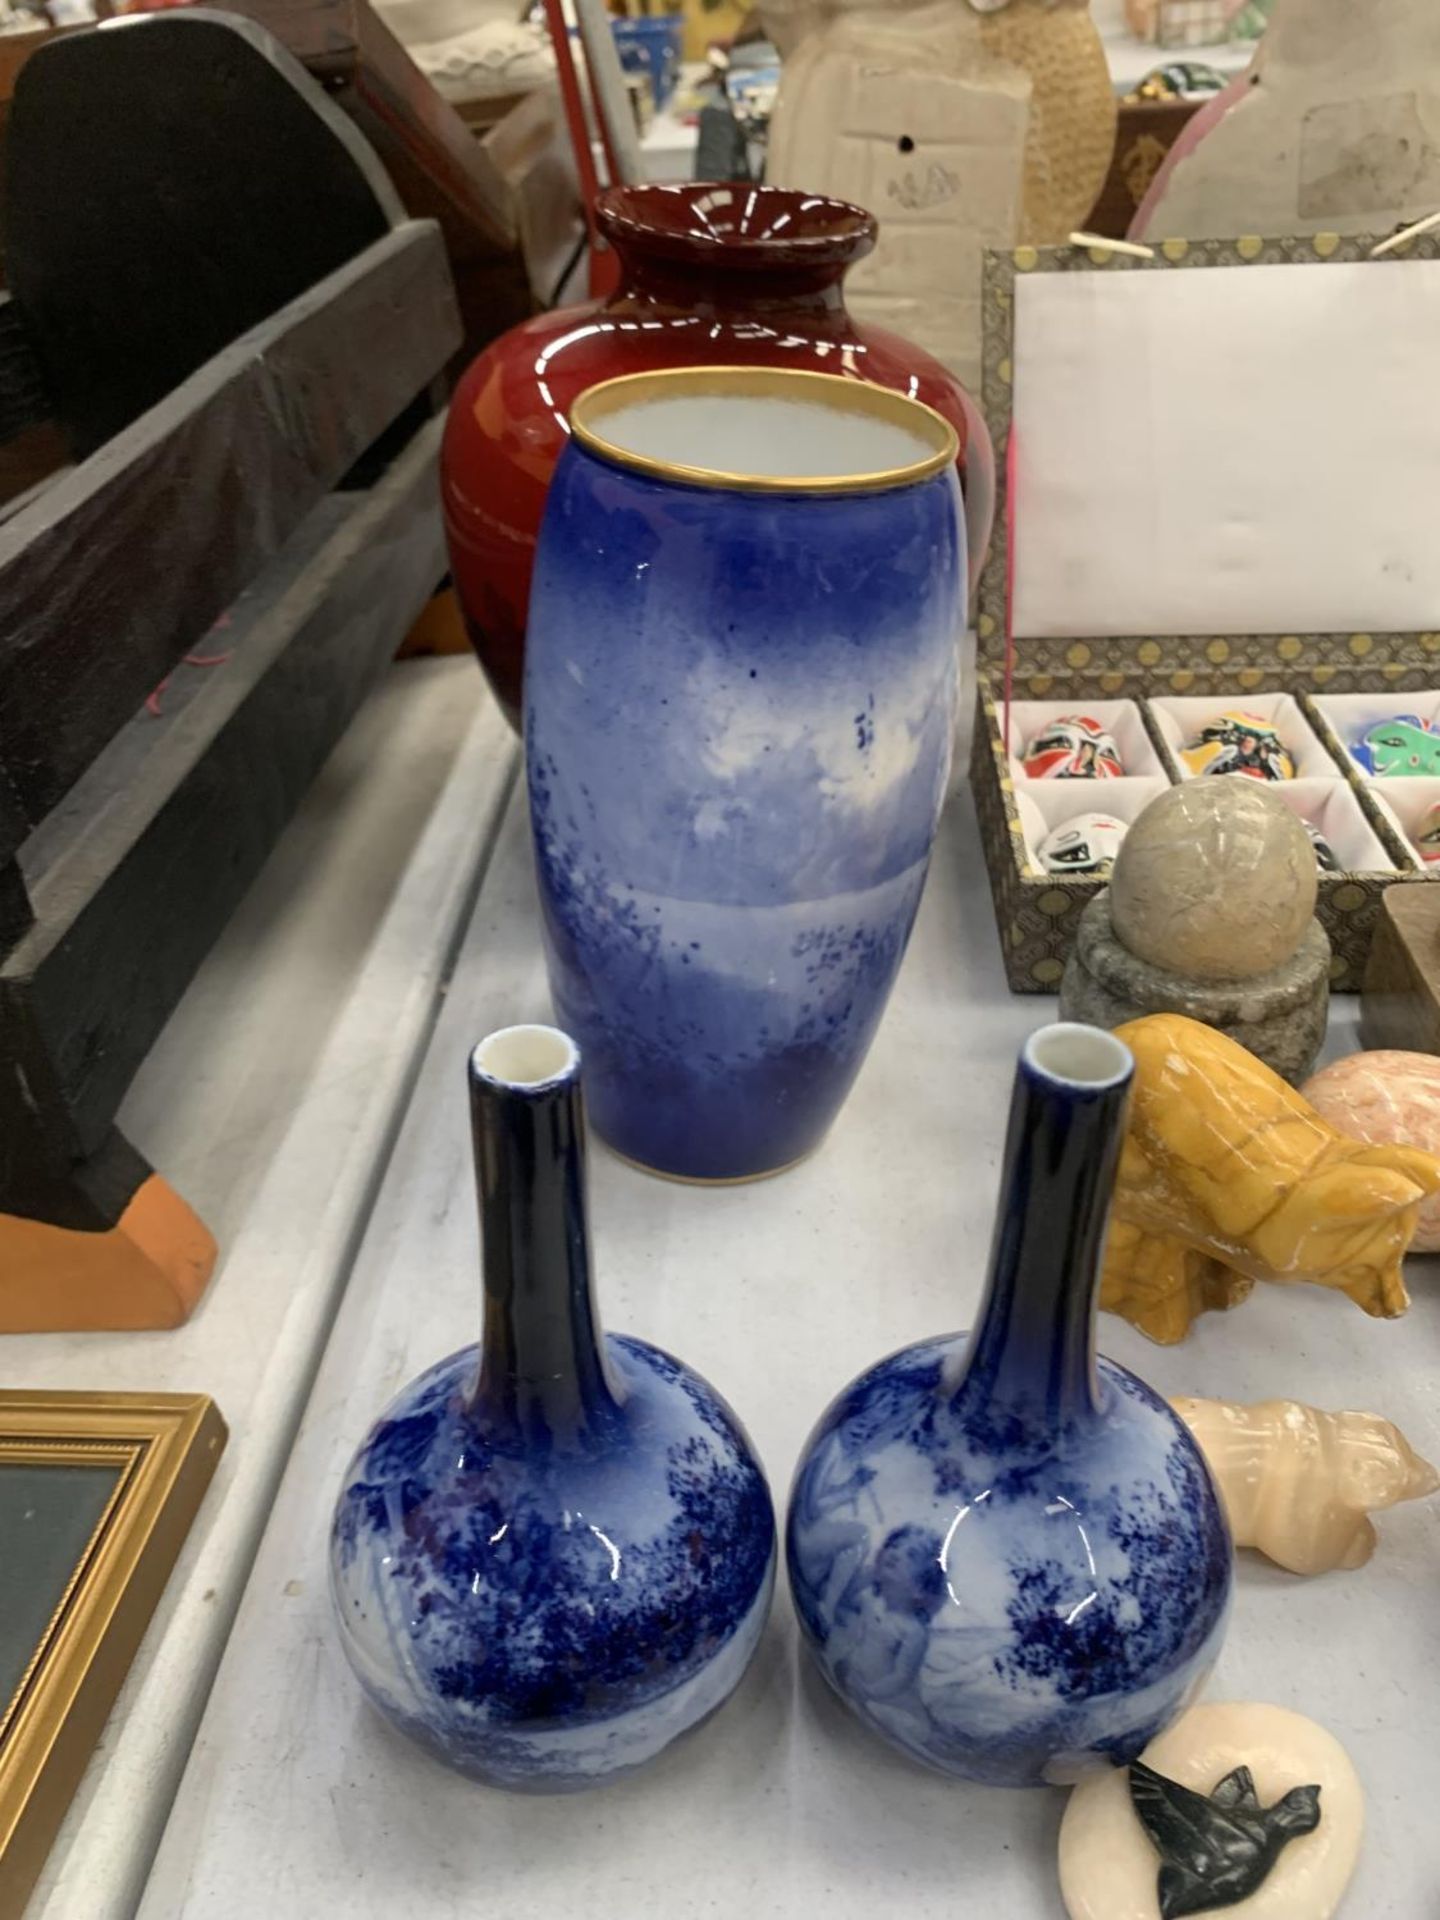 A ROYAL DOULTON FLAMBE VASE - SMALL CHIP TO BASE PLUS A LARGE AND TWO SMALLER BLUE VASES - ALL A/F